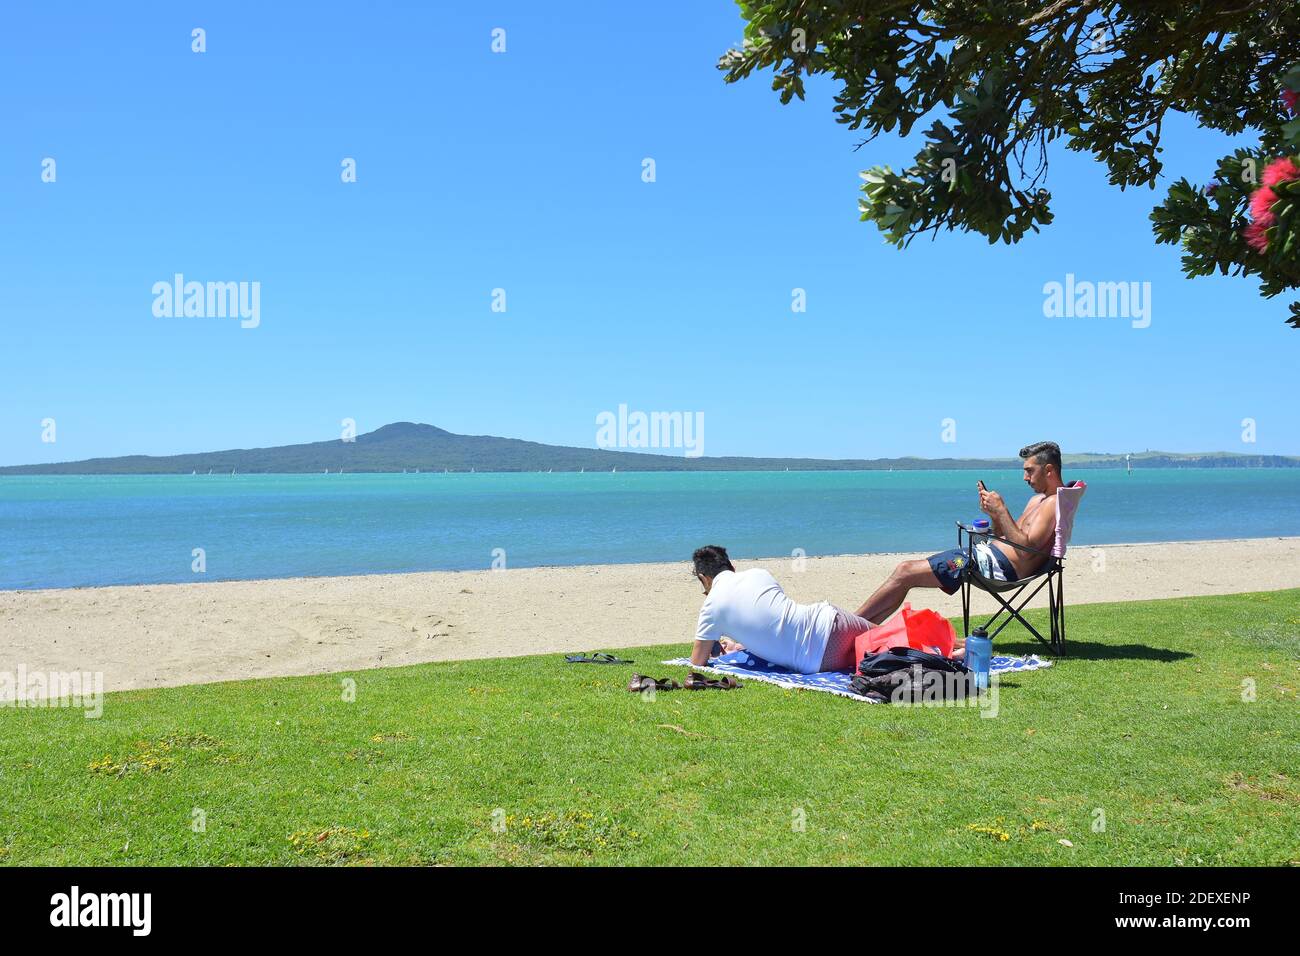 AUCKLAND, NEW ZEALAND - Nov 28, 2020: View of people at St Heliers Bay beach with Rangitoto Island in background Stock Photo